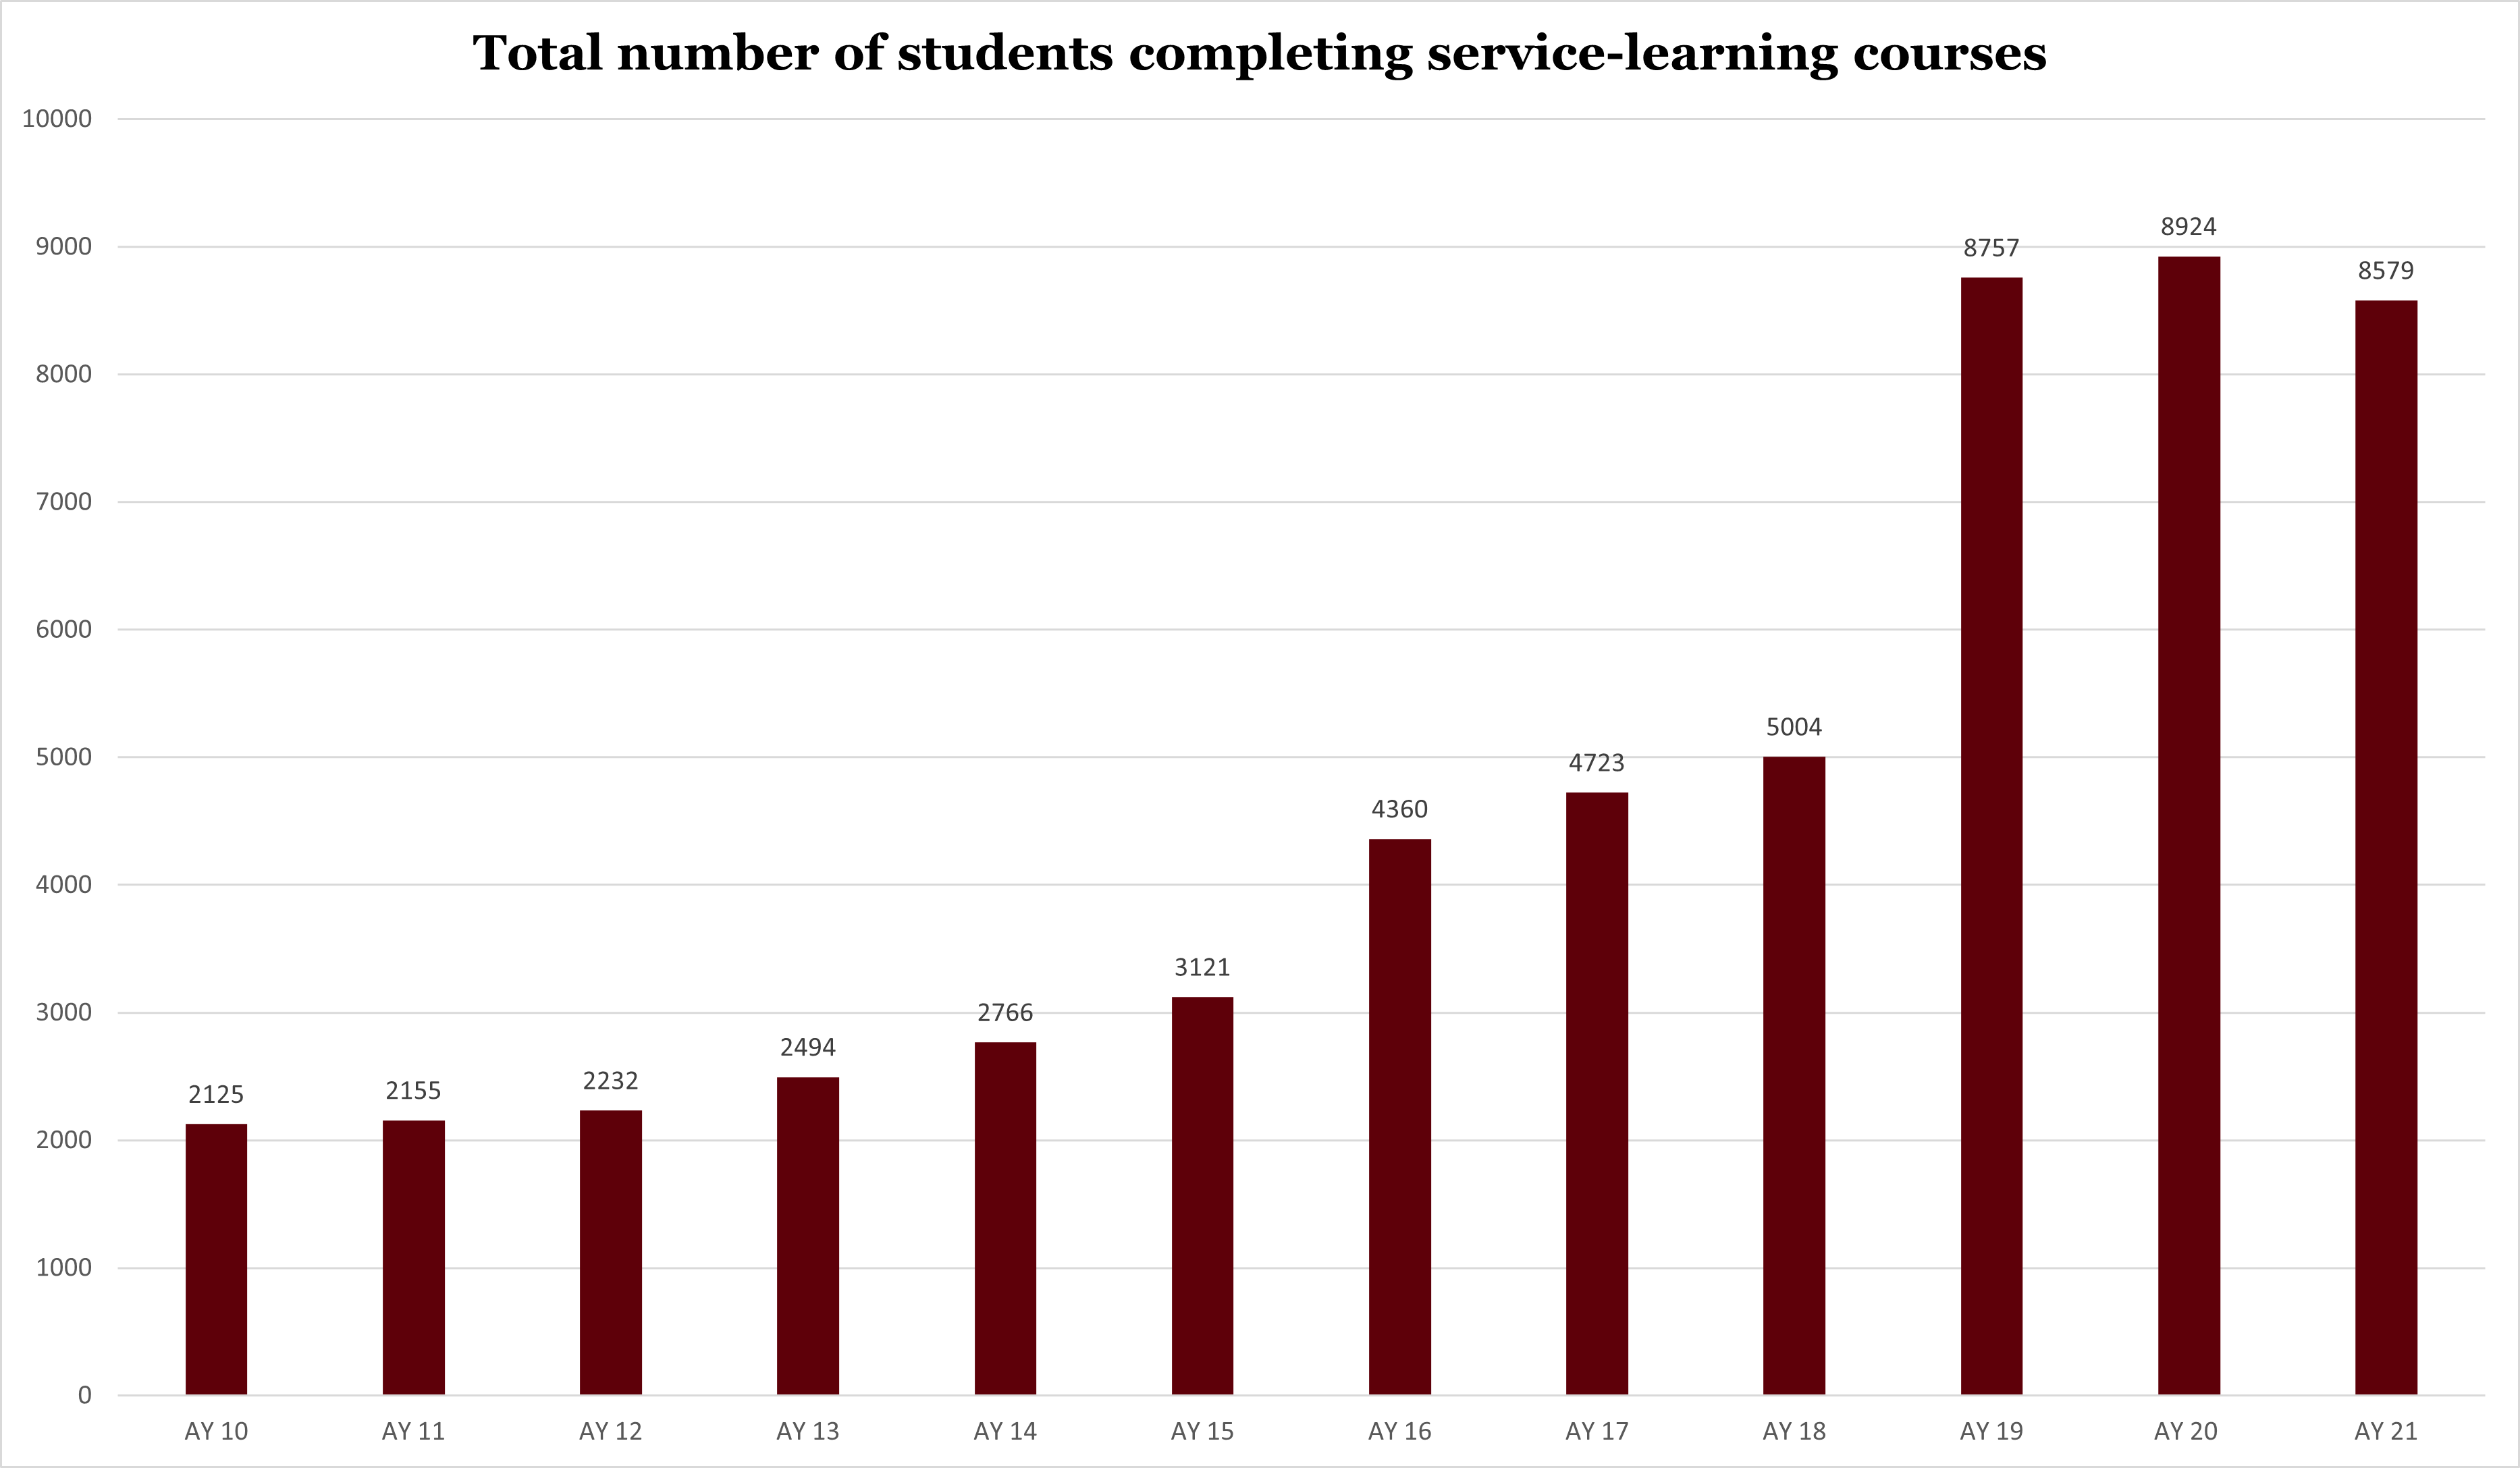 Graph of total number of service-learning students over the years